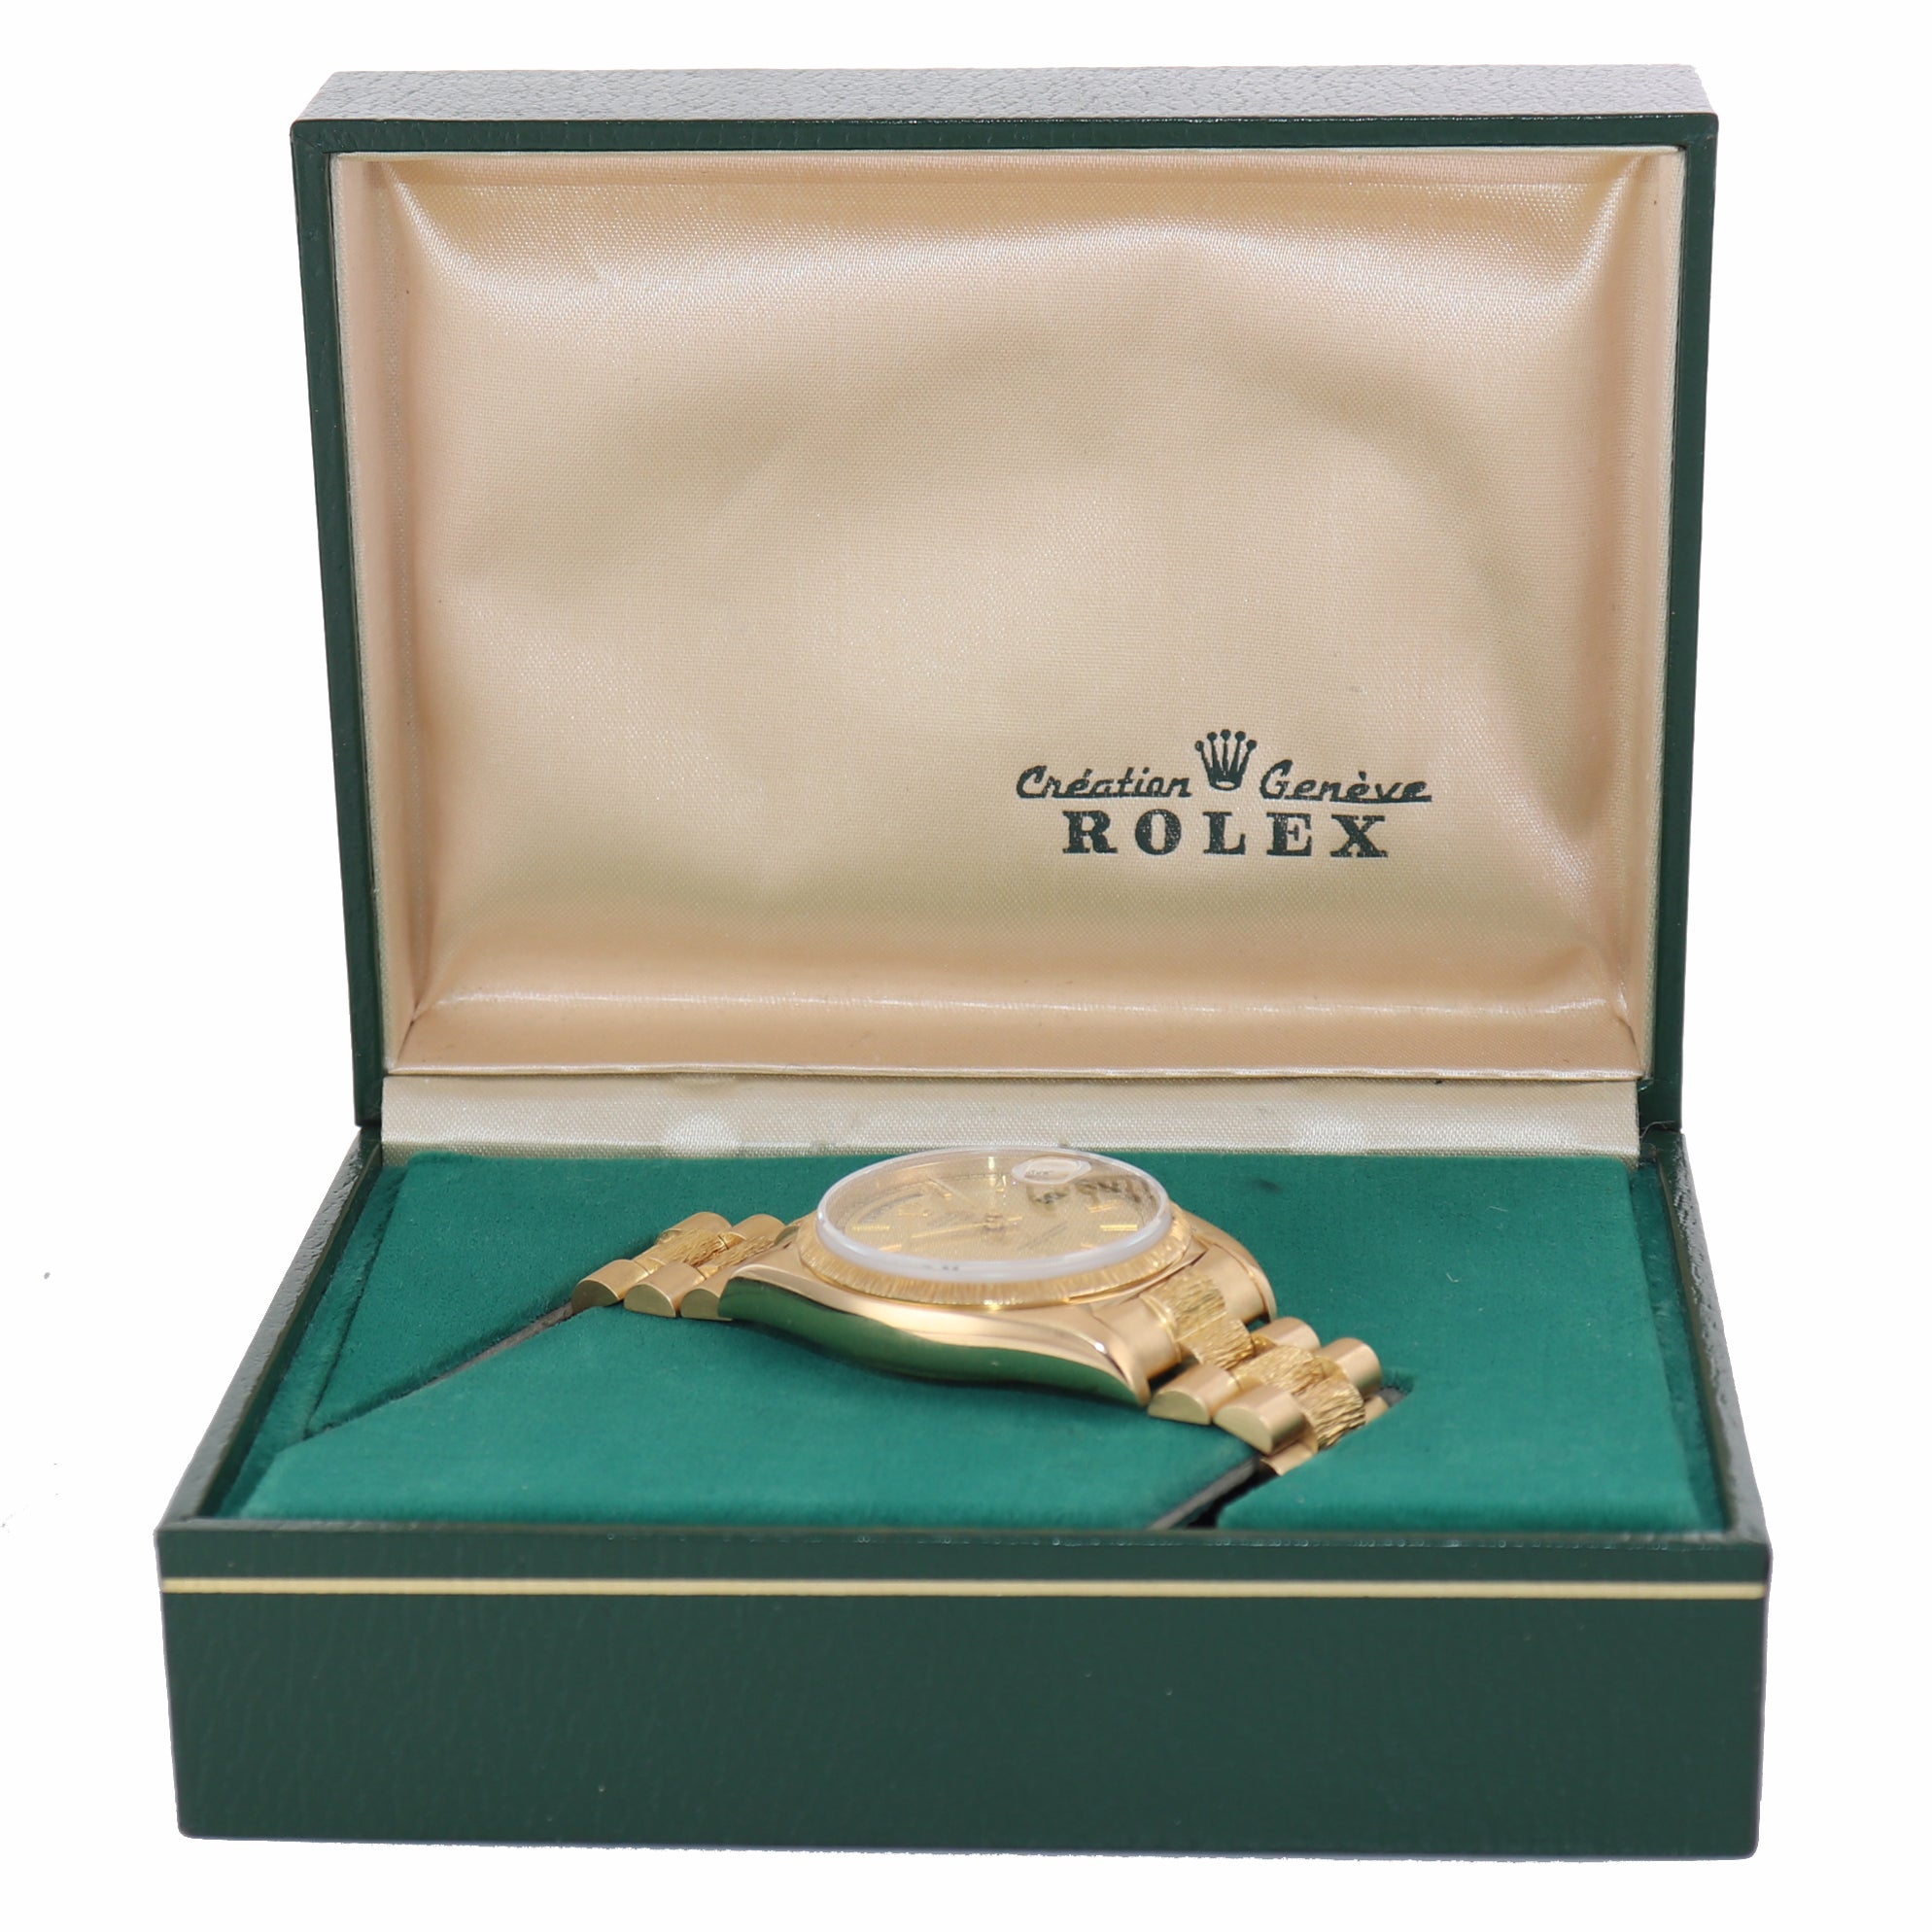 Rolex President Day Date 36mm 18038 Yellow Gold Champagne Quickset Watch Box